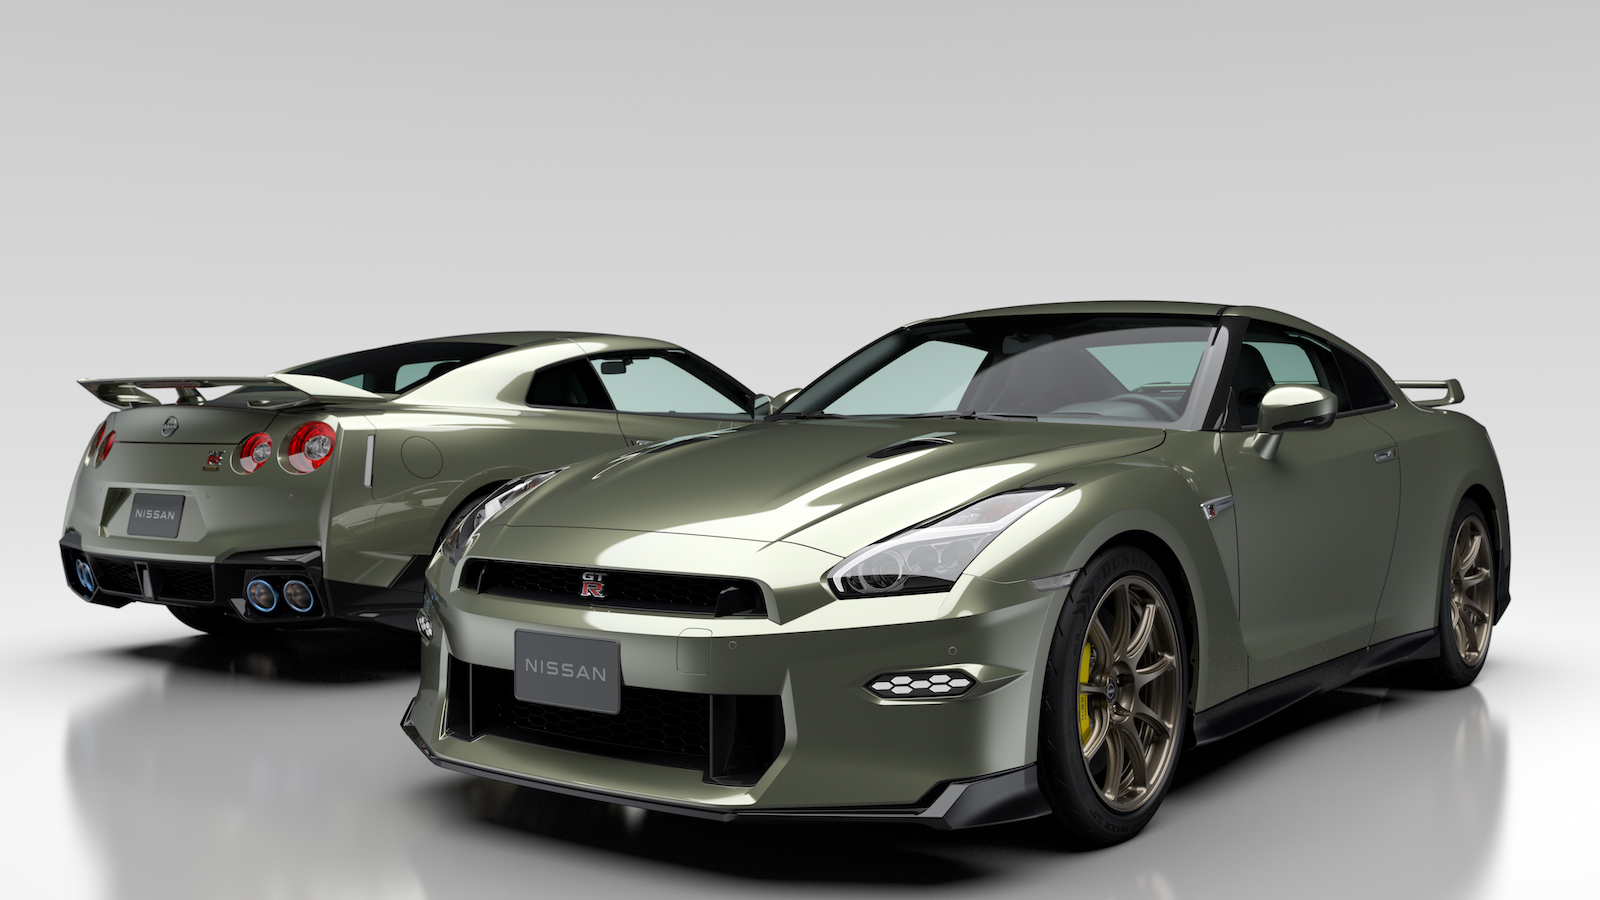 Is THIS the New Nissan Skyline GT-R? 